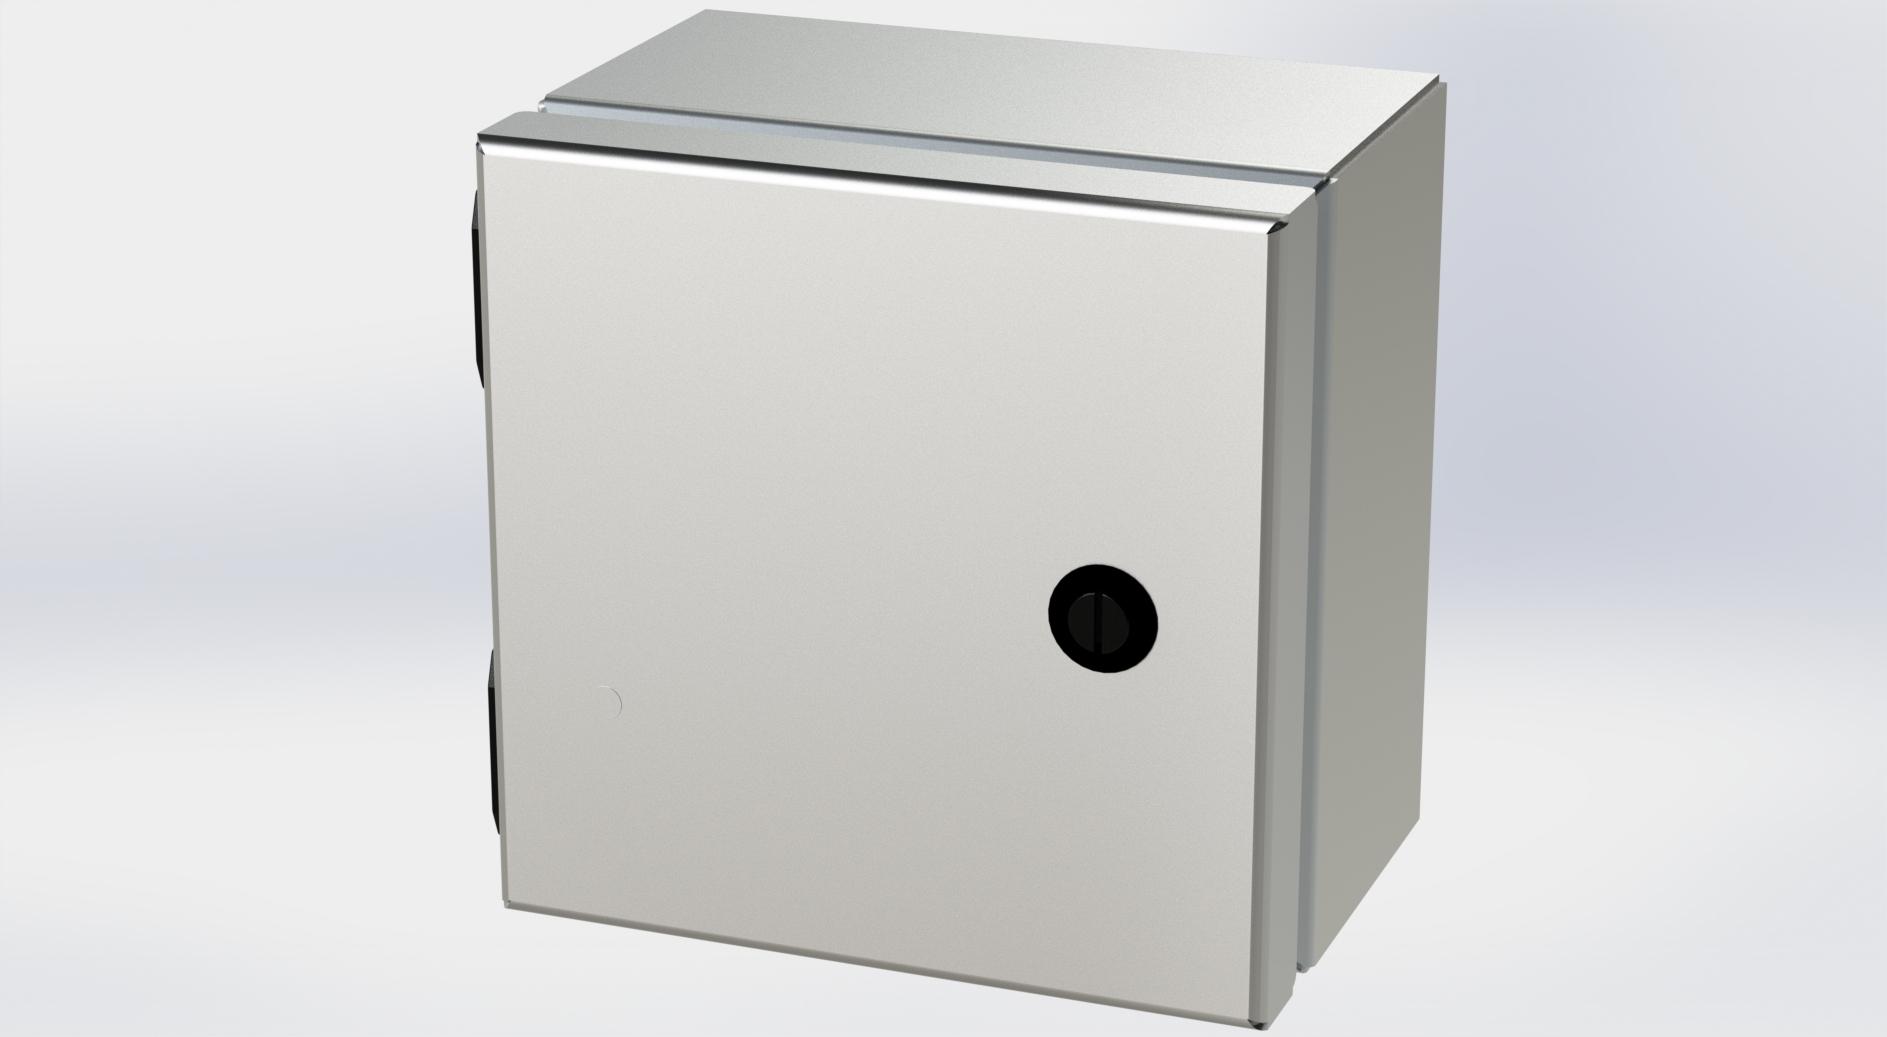 Saginaw Control SCE-606ELJSS S.S. ELJ Enclosure, Height:6.00", Width:6.00", Depth:4.00", #4 brushed finish on all exterior surfaces. Optional sub-panels are powder coated white.